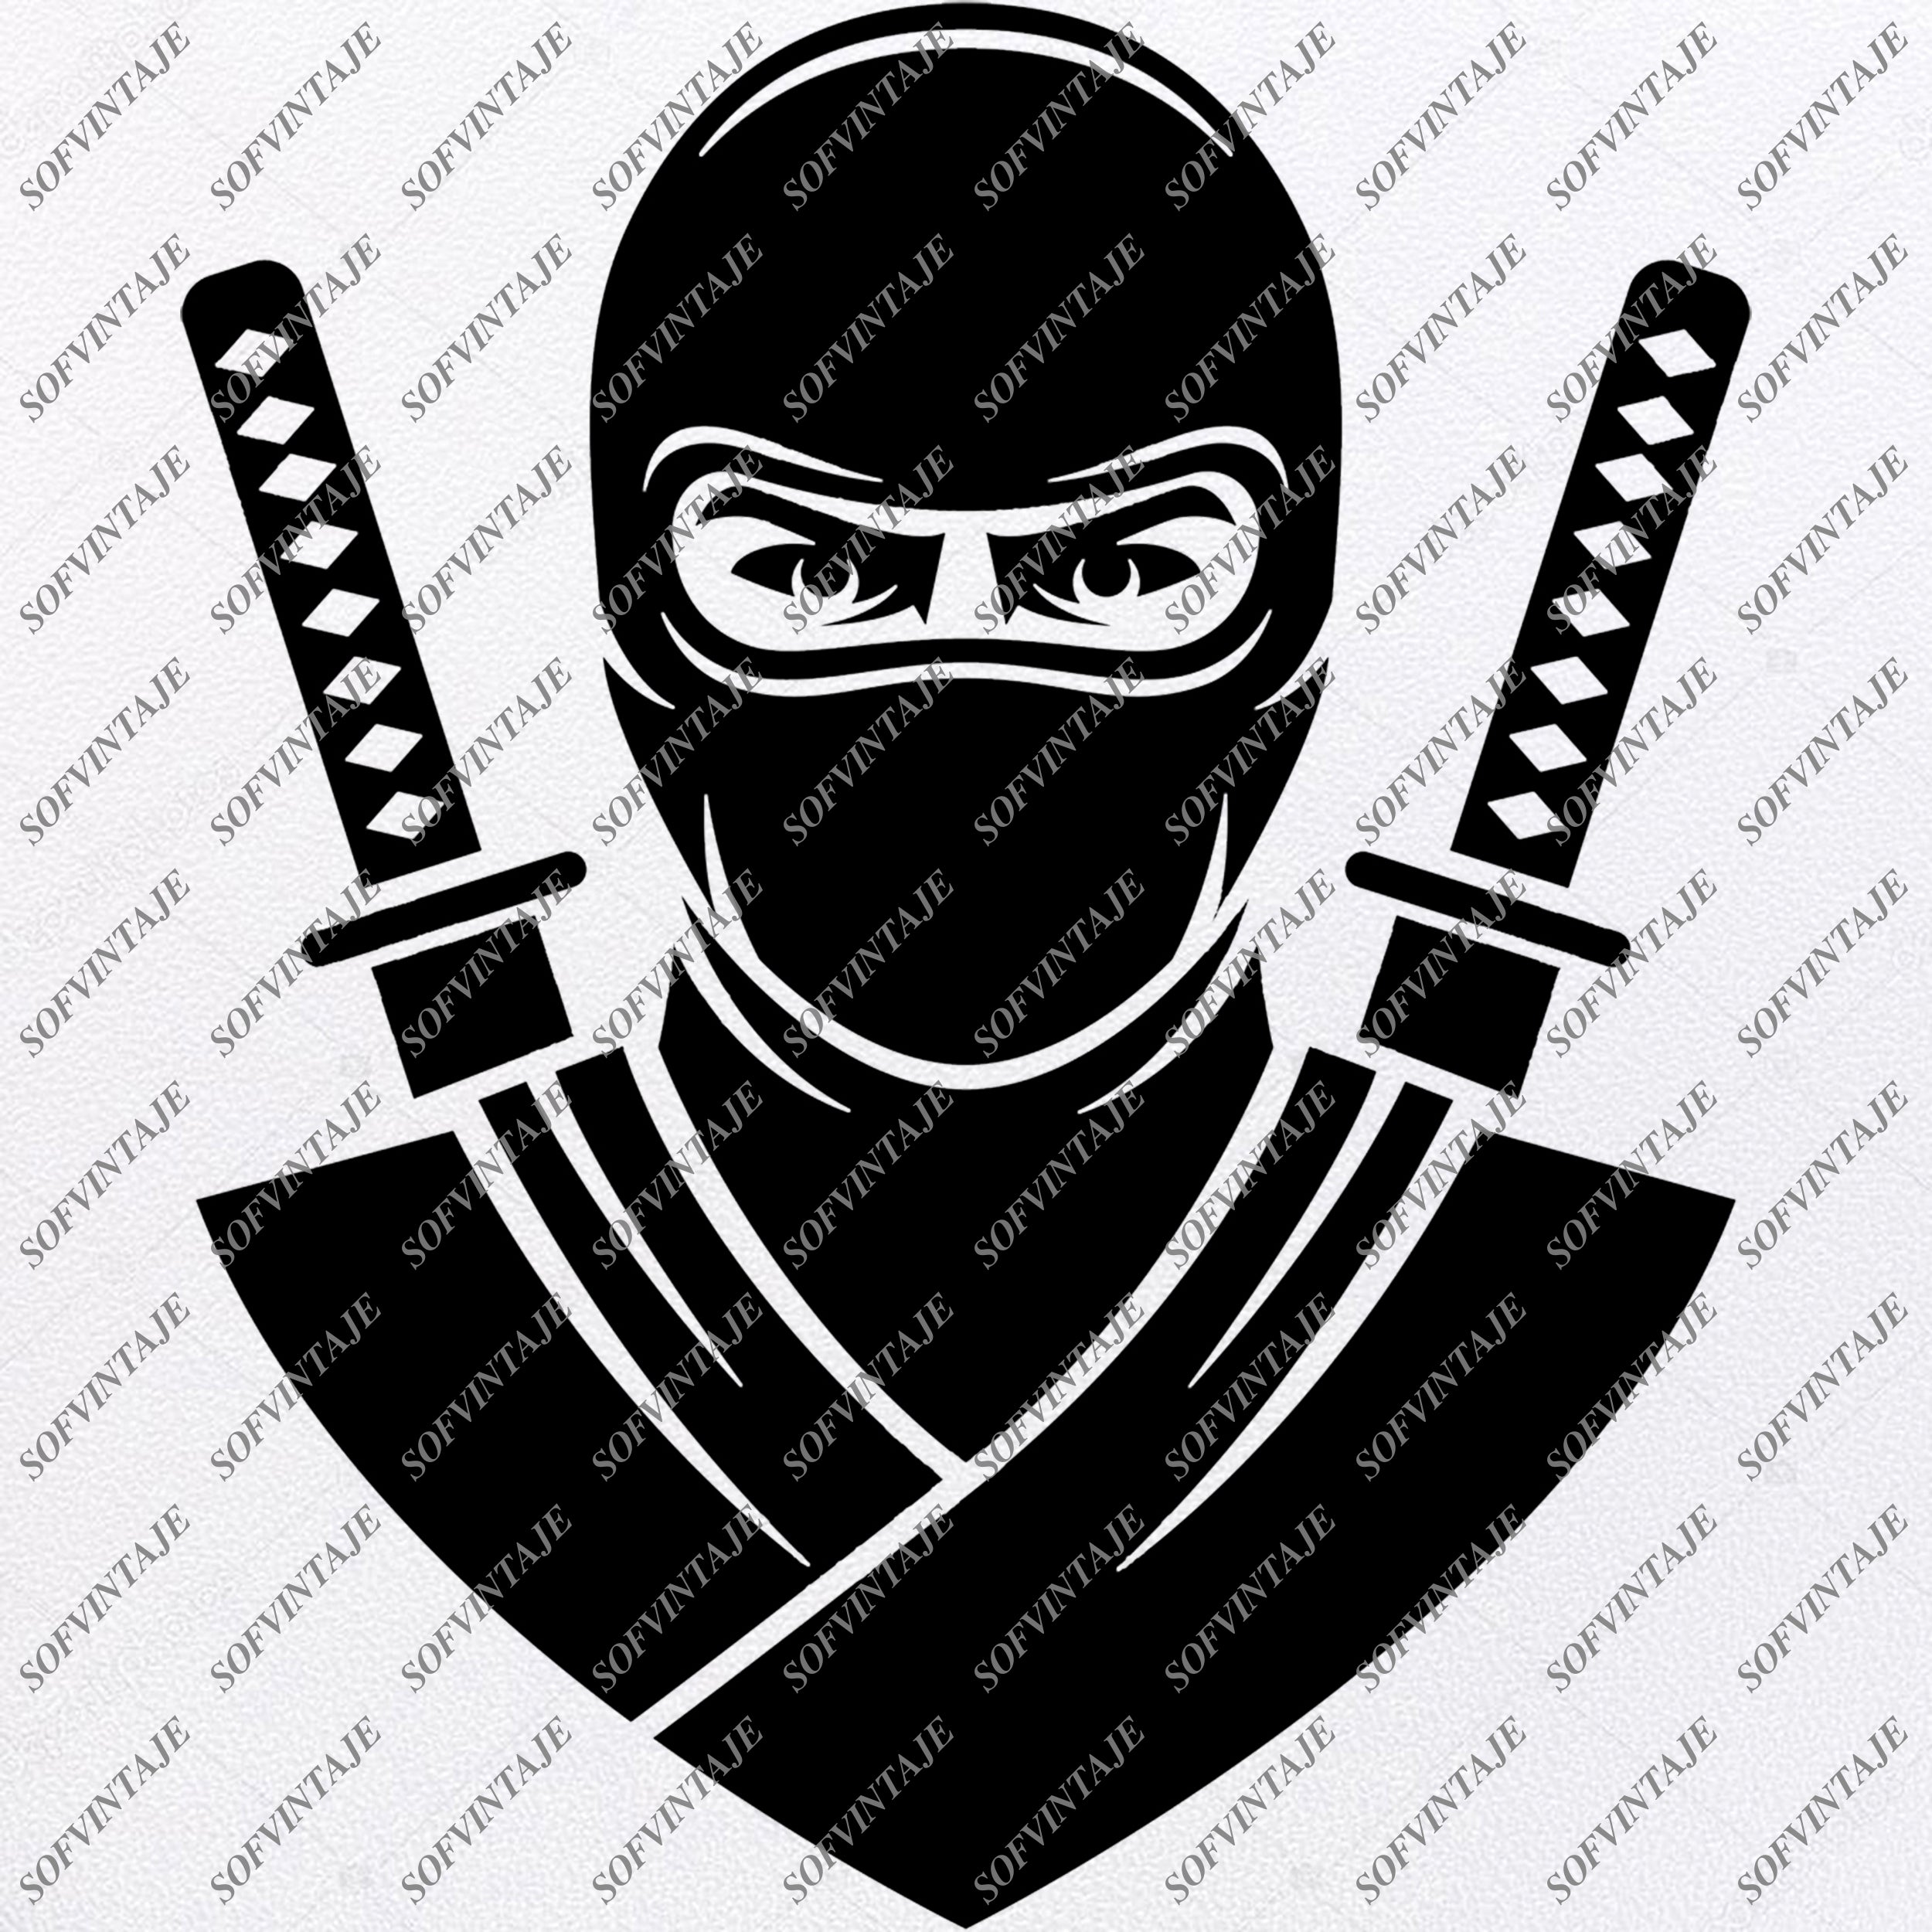 Download 41+ Ninja Svg Free Pics Free SVG files | Silhouette and ...